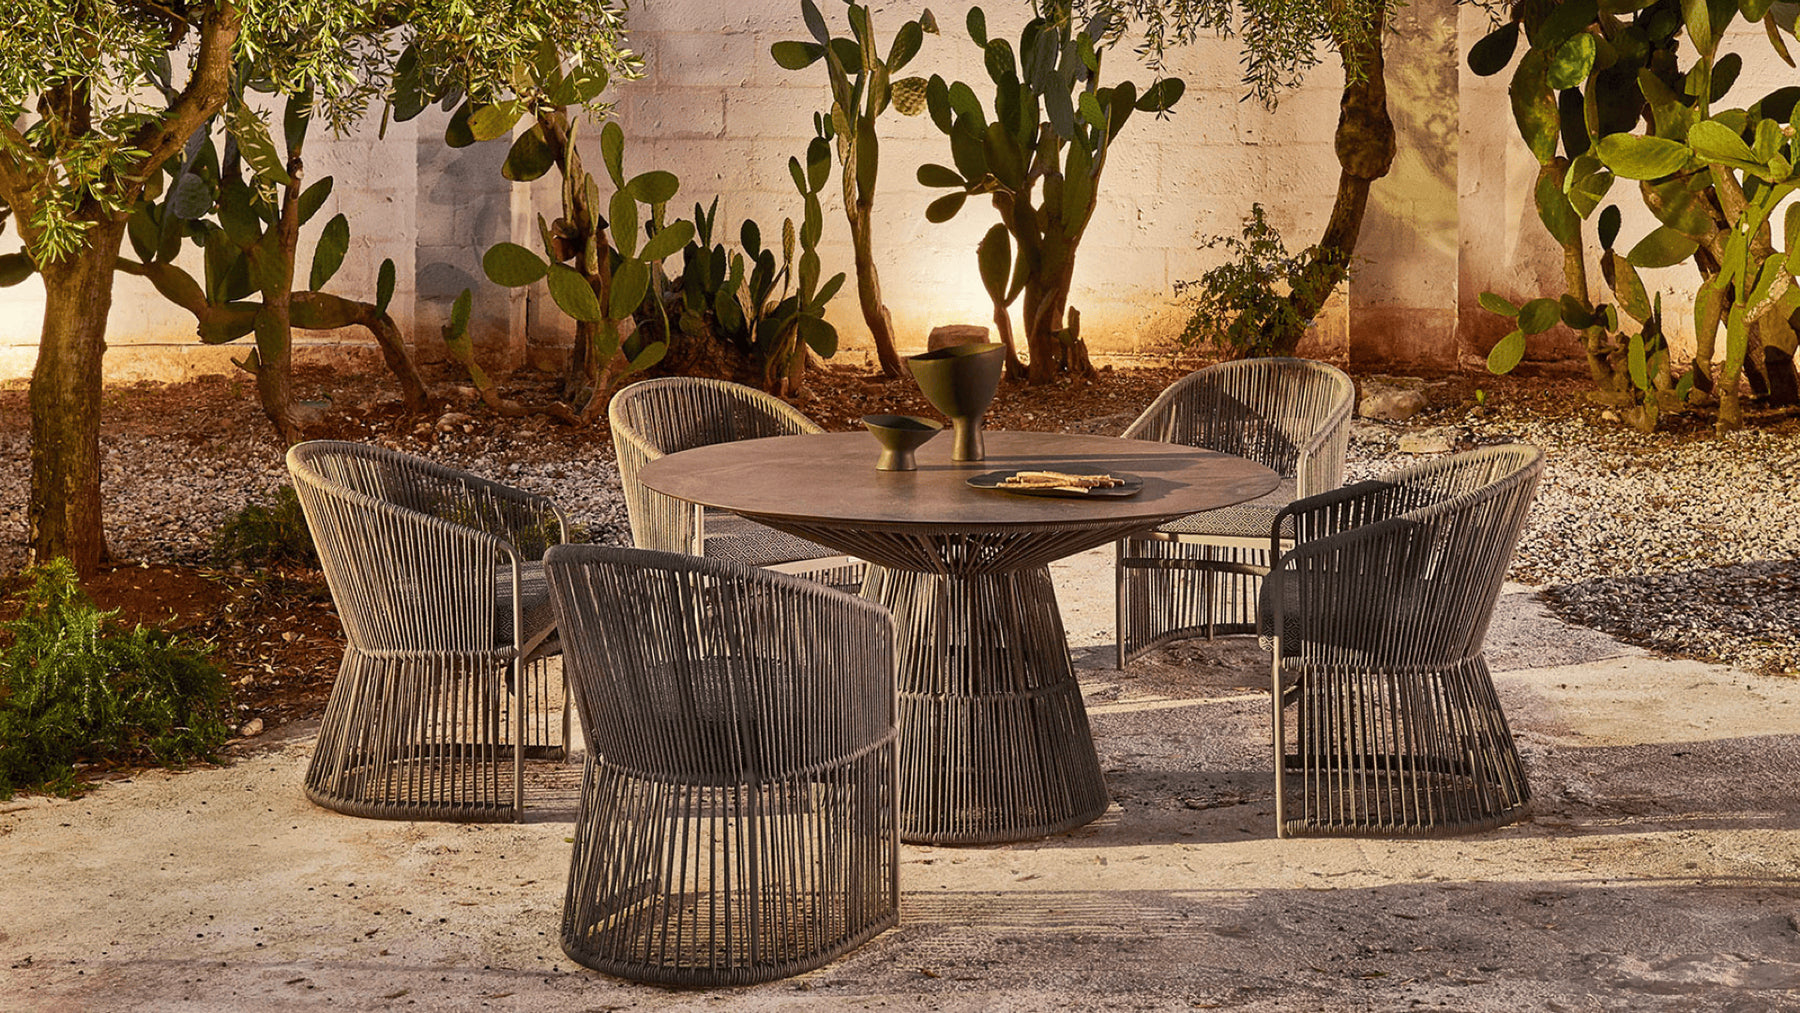 Curved woven dining armchairs in a desert garden at night.